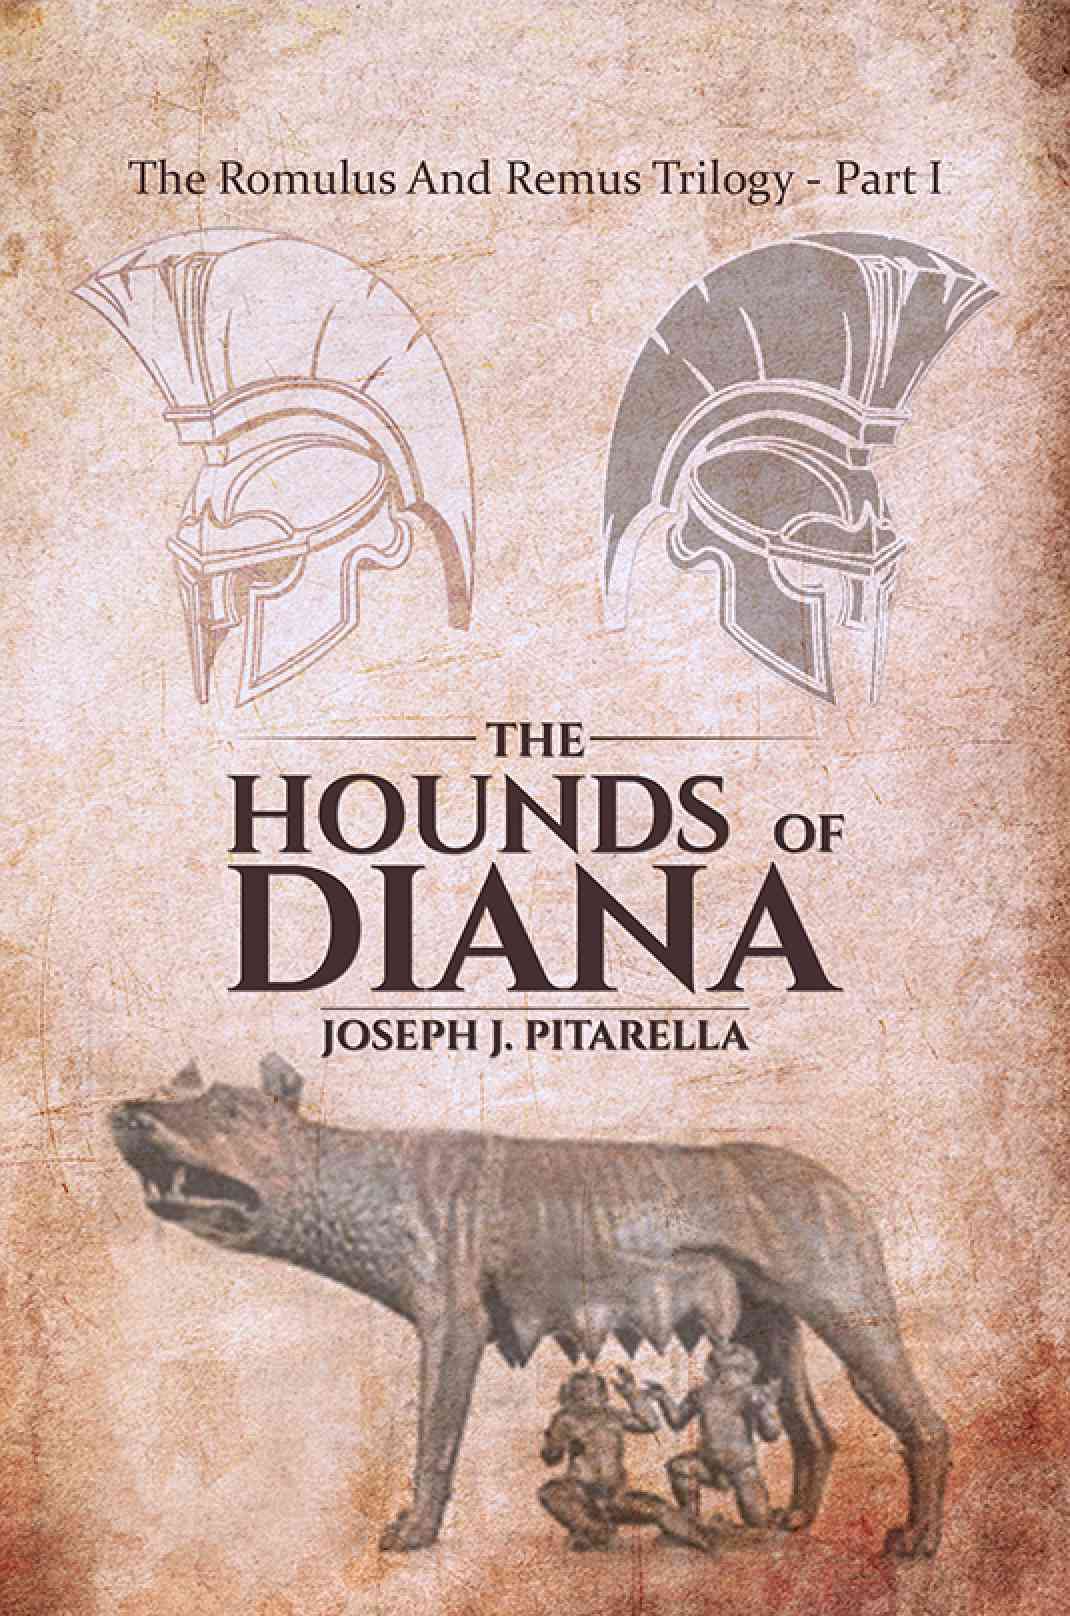 ‘The Hounds of Diana – The Romulus and Remus Trilogy – Part 1’ receives an Amazon Review